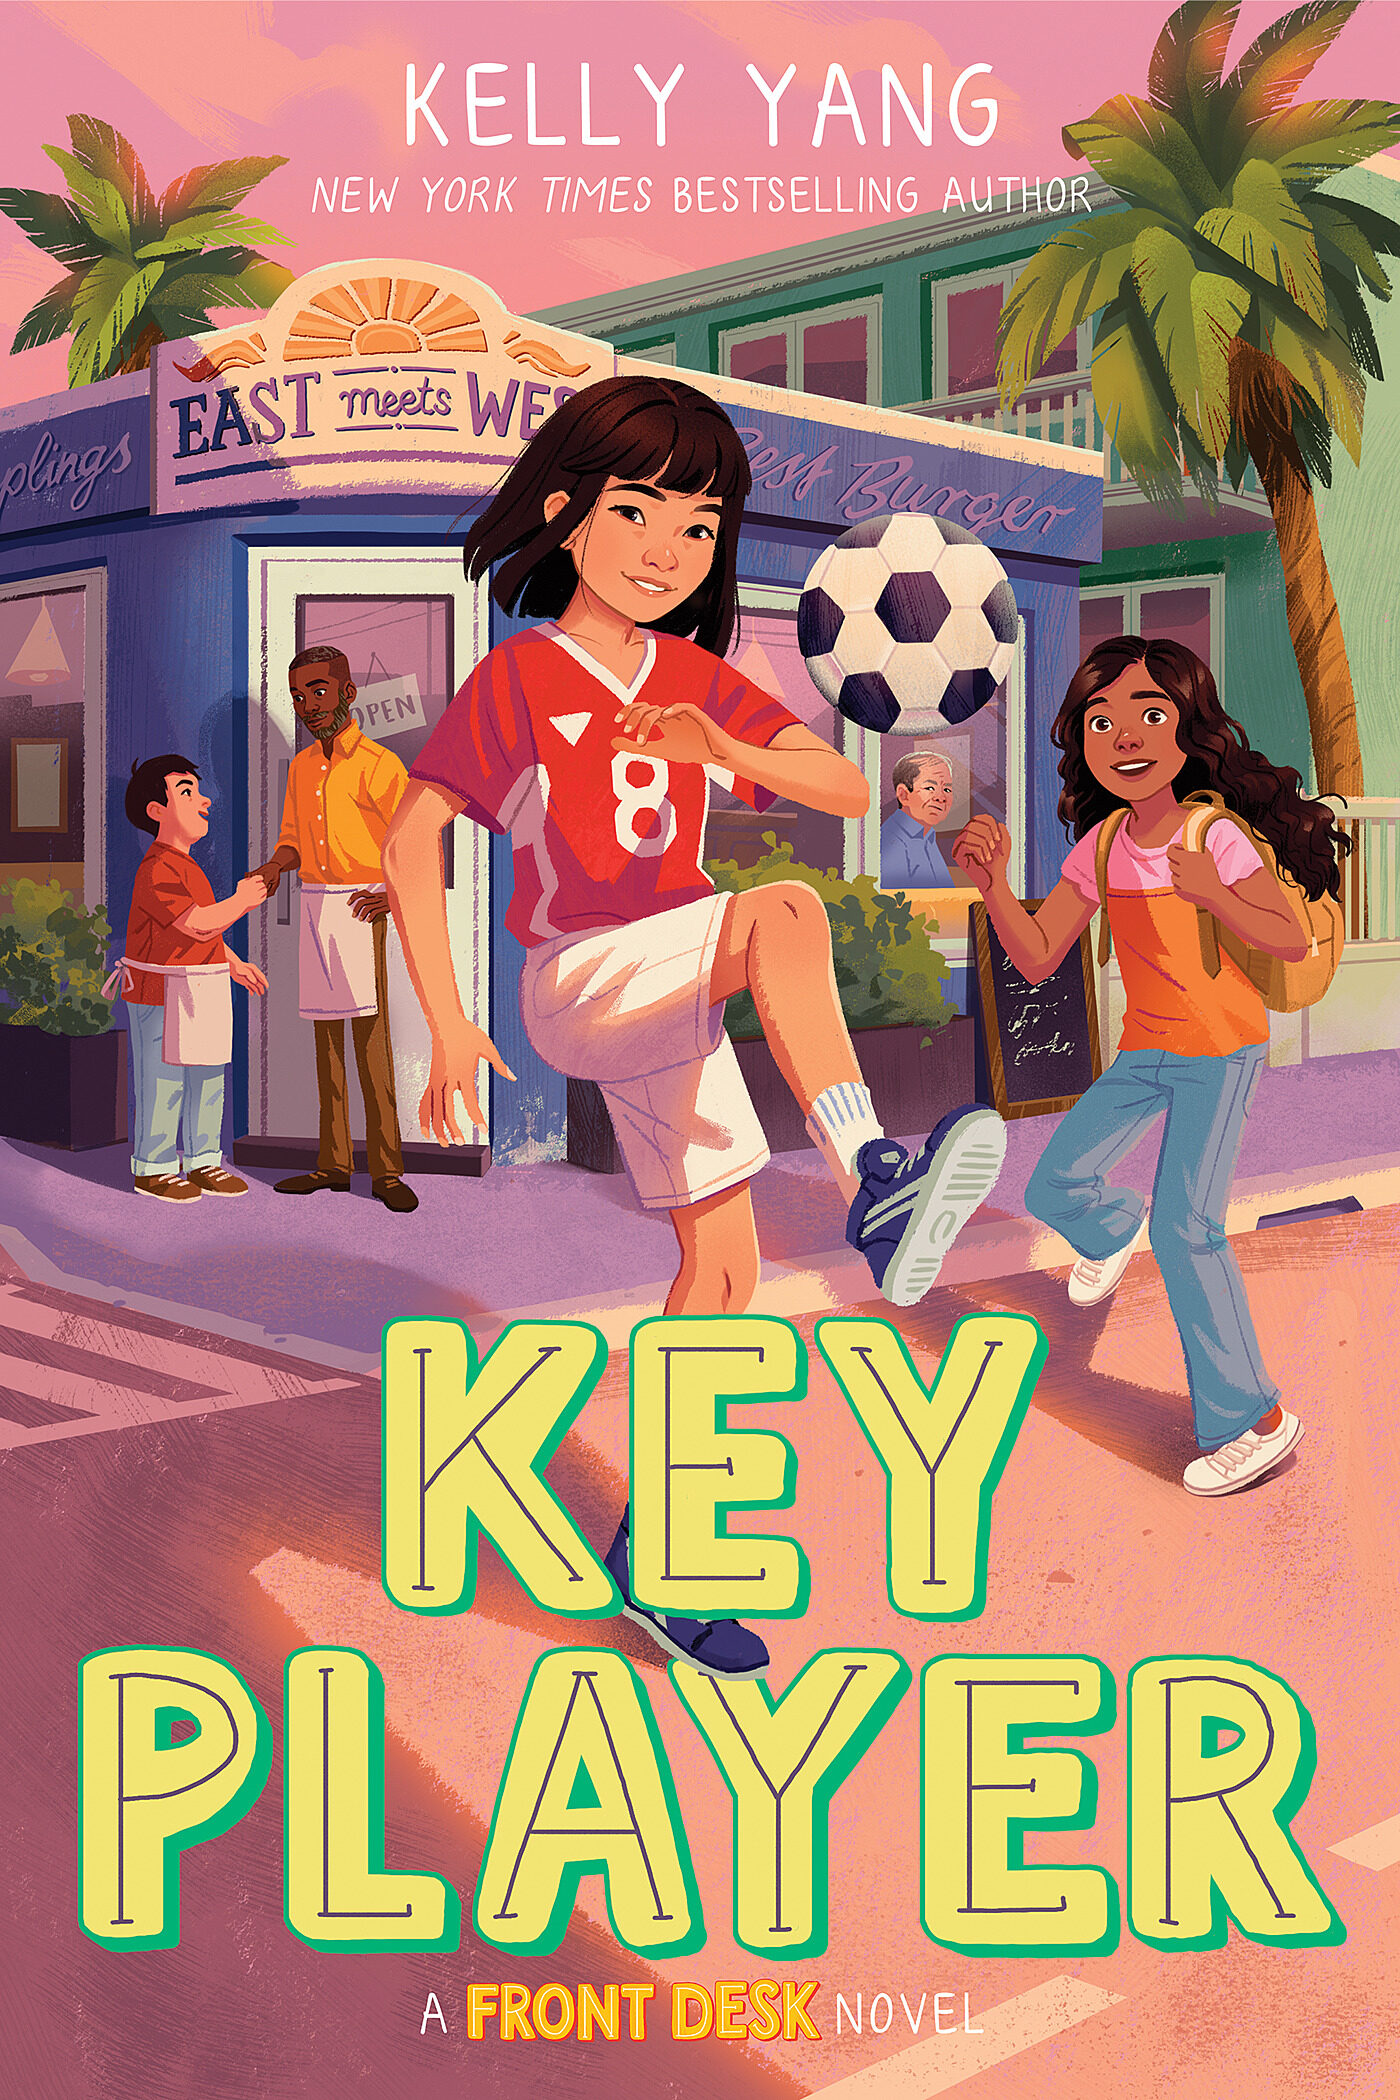 Cover Image of Key Player (Front Desk #4)